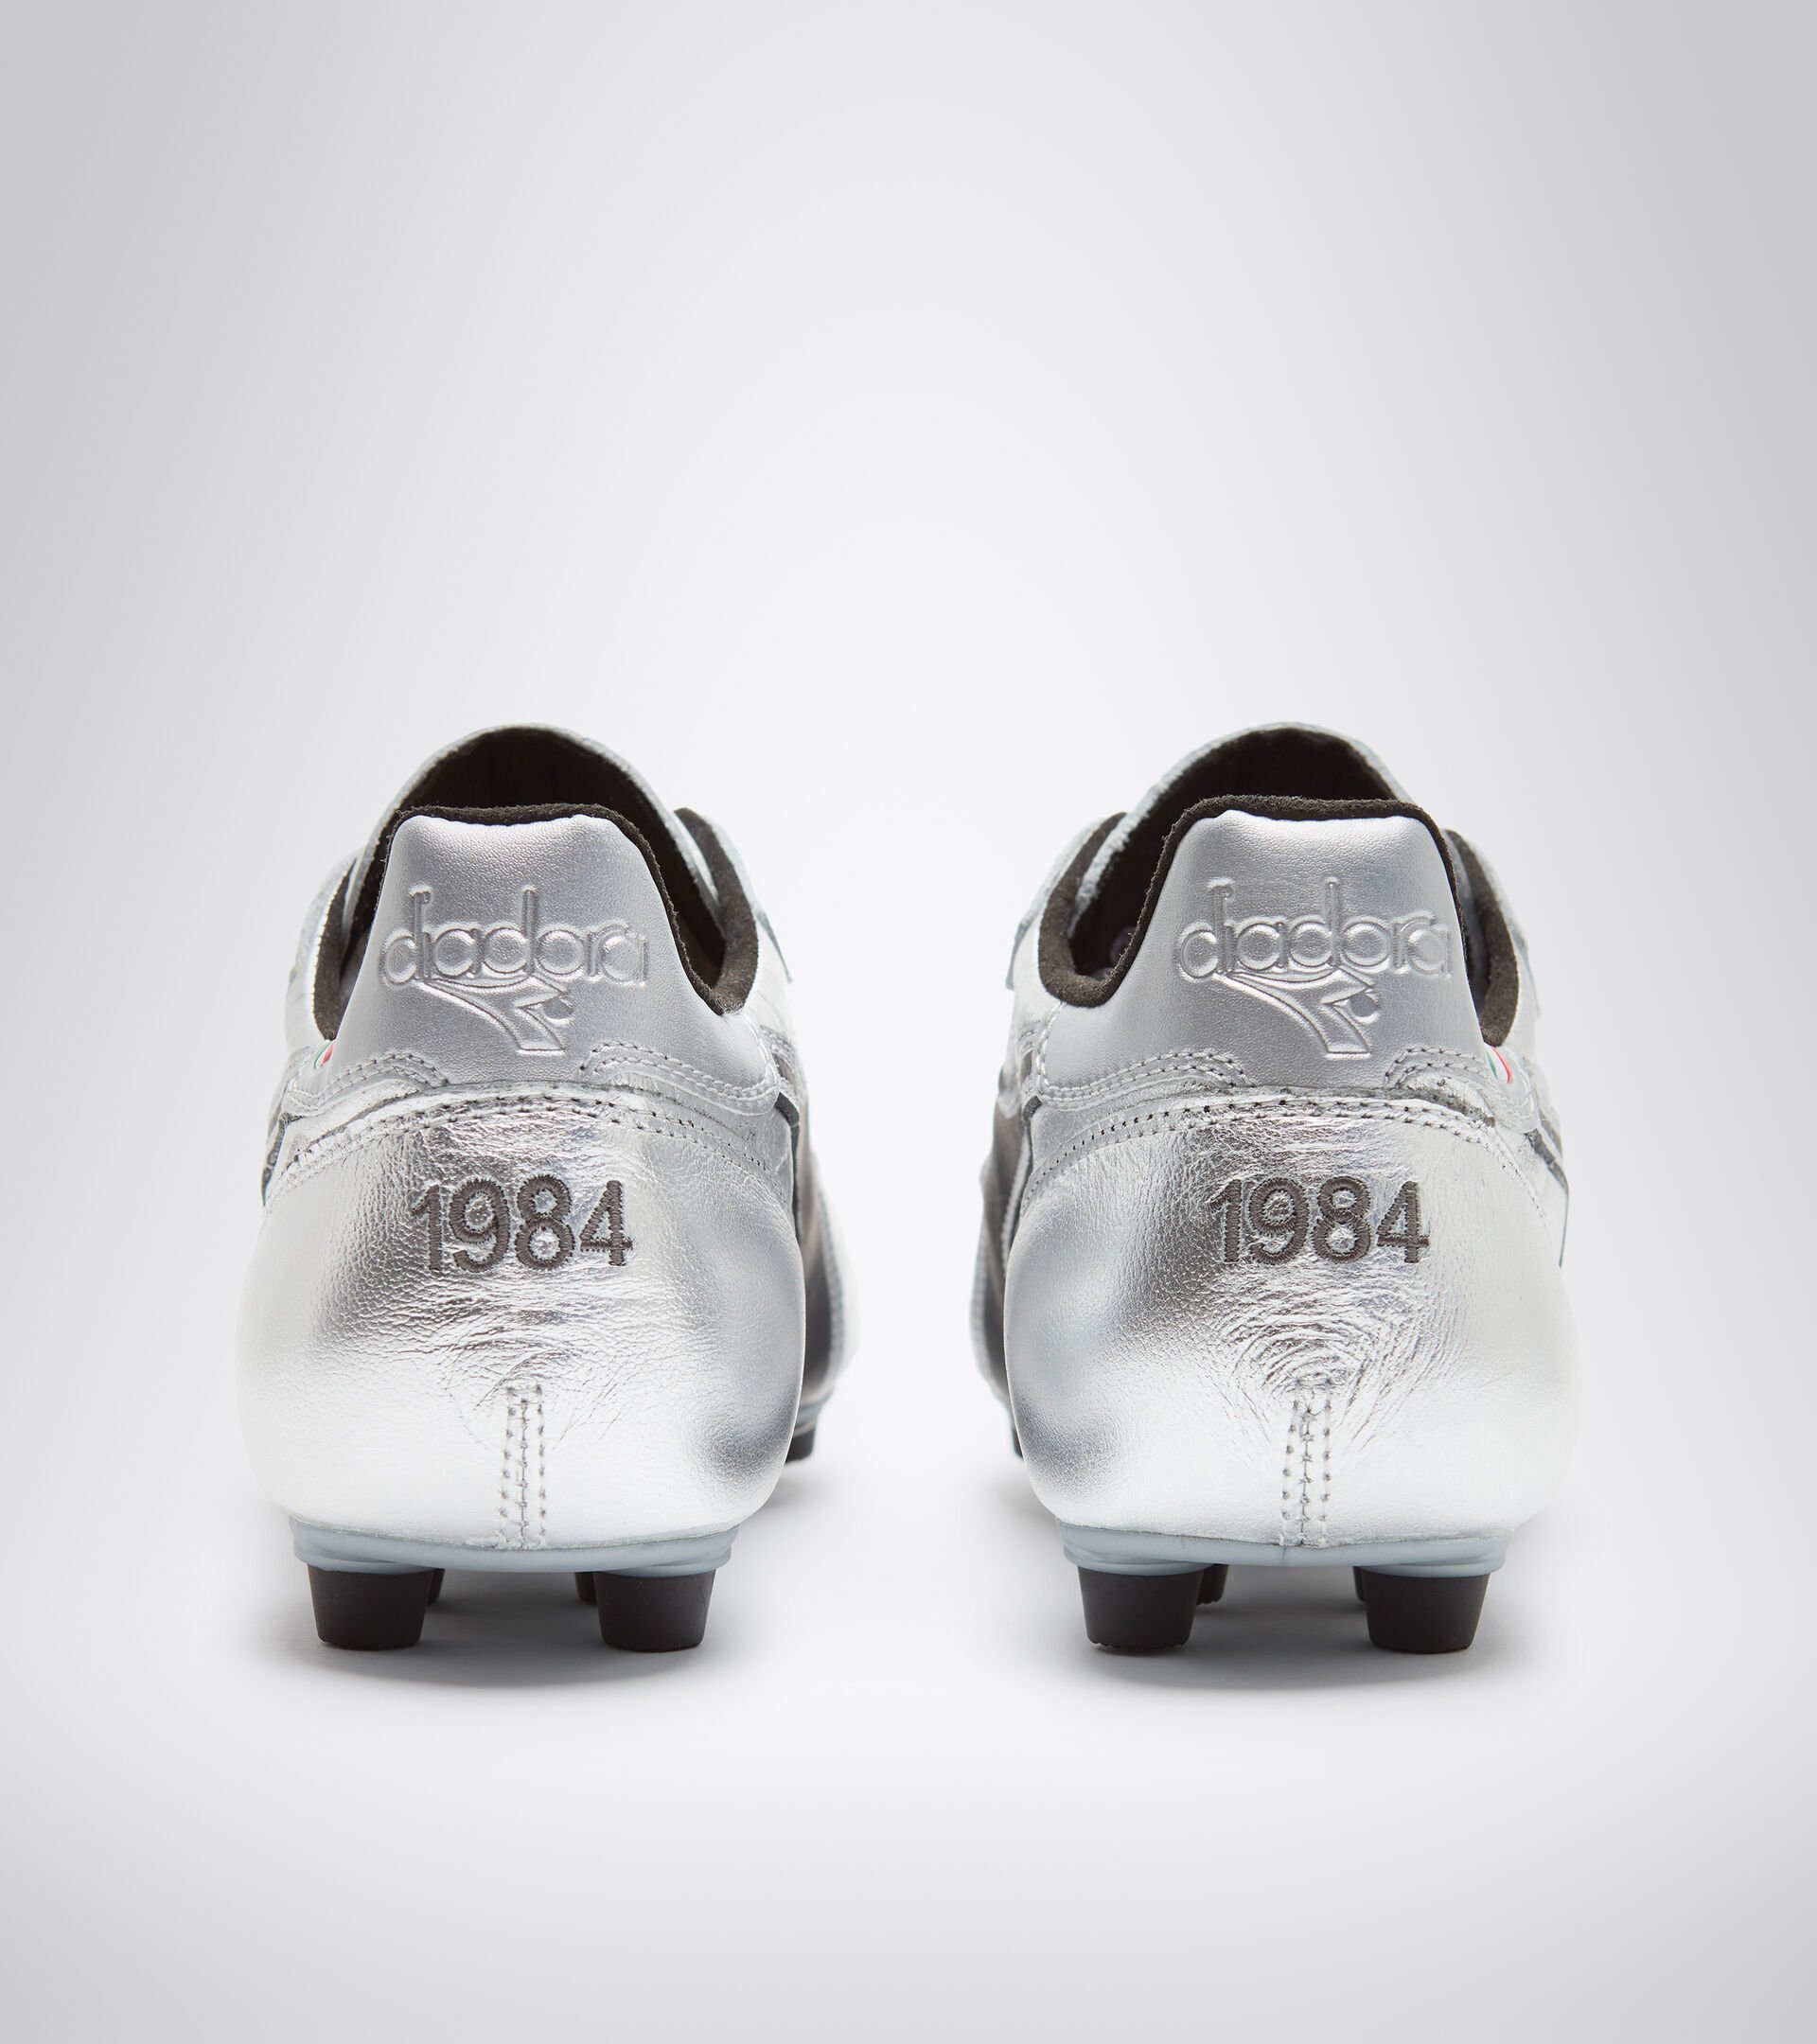 Firm ground football boots - Made in Italy BRASIL ITALY OG LT+  MDPU SILVER DD/ANTHRACITE - Diadora